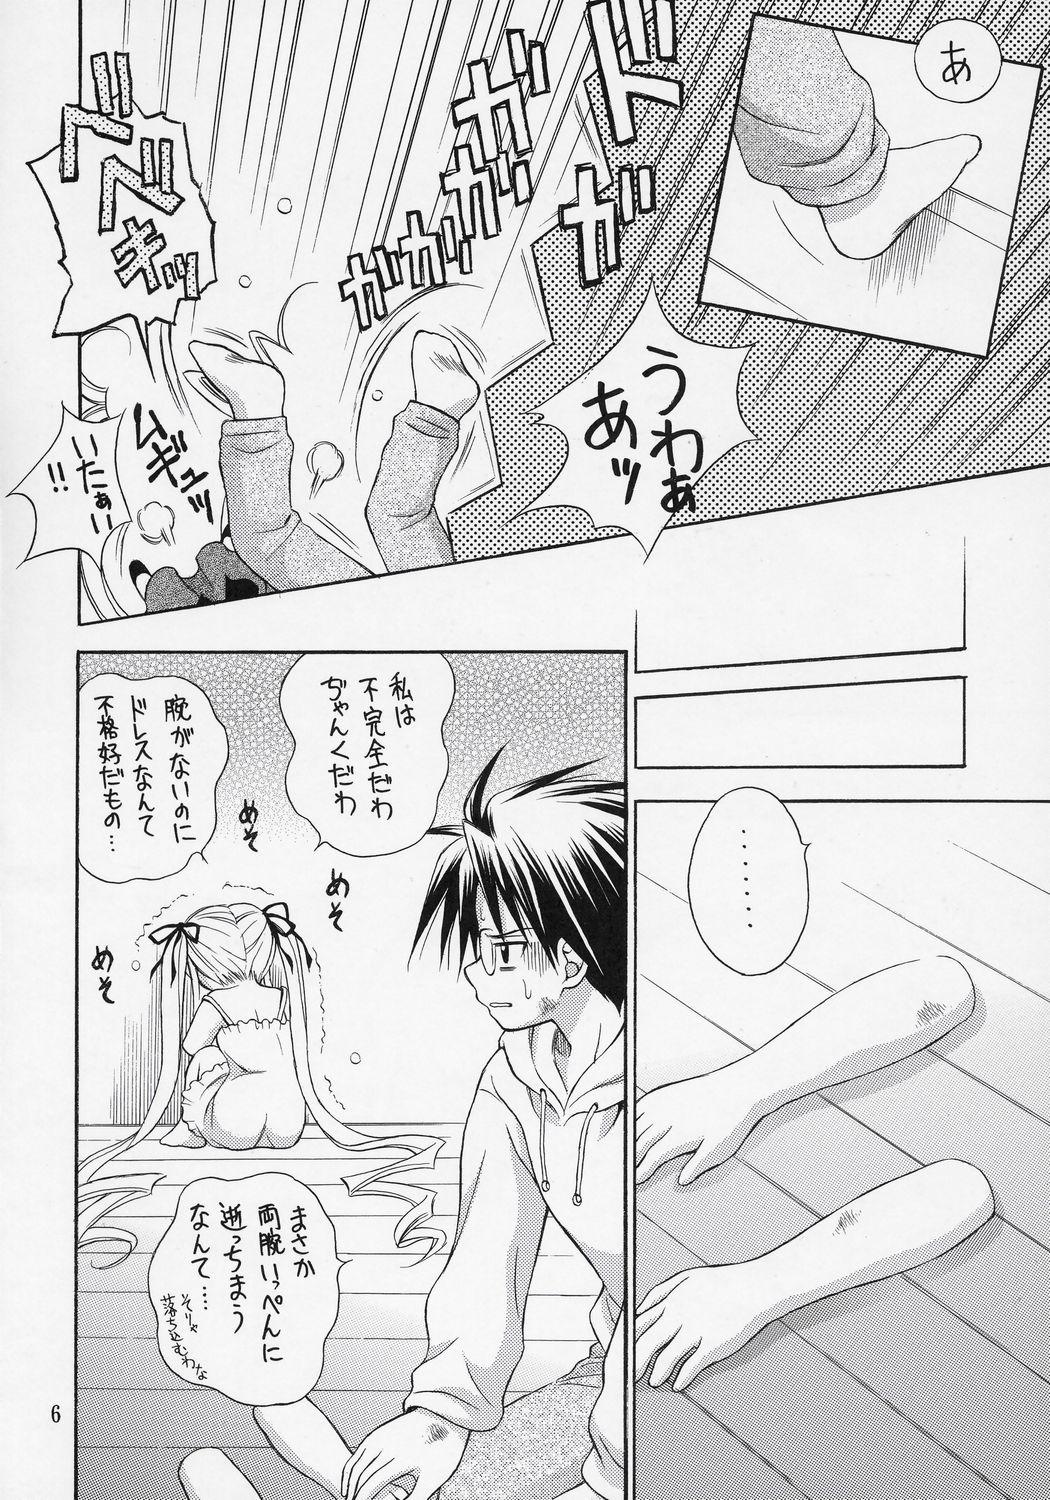 Blackmail Ningyou Ai 6 - Rozen maiden Tanned - Page 5